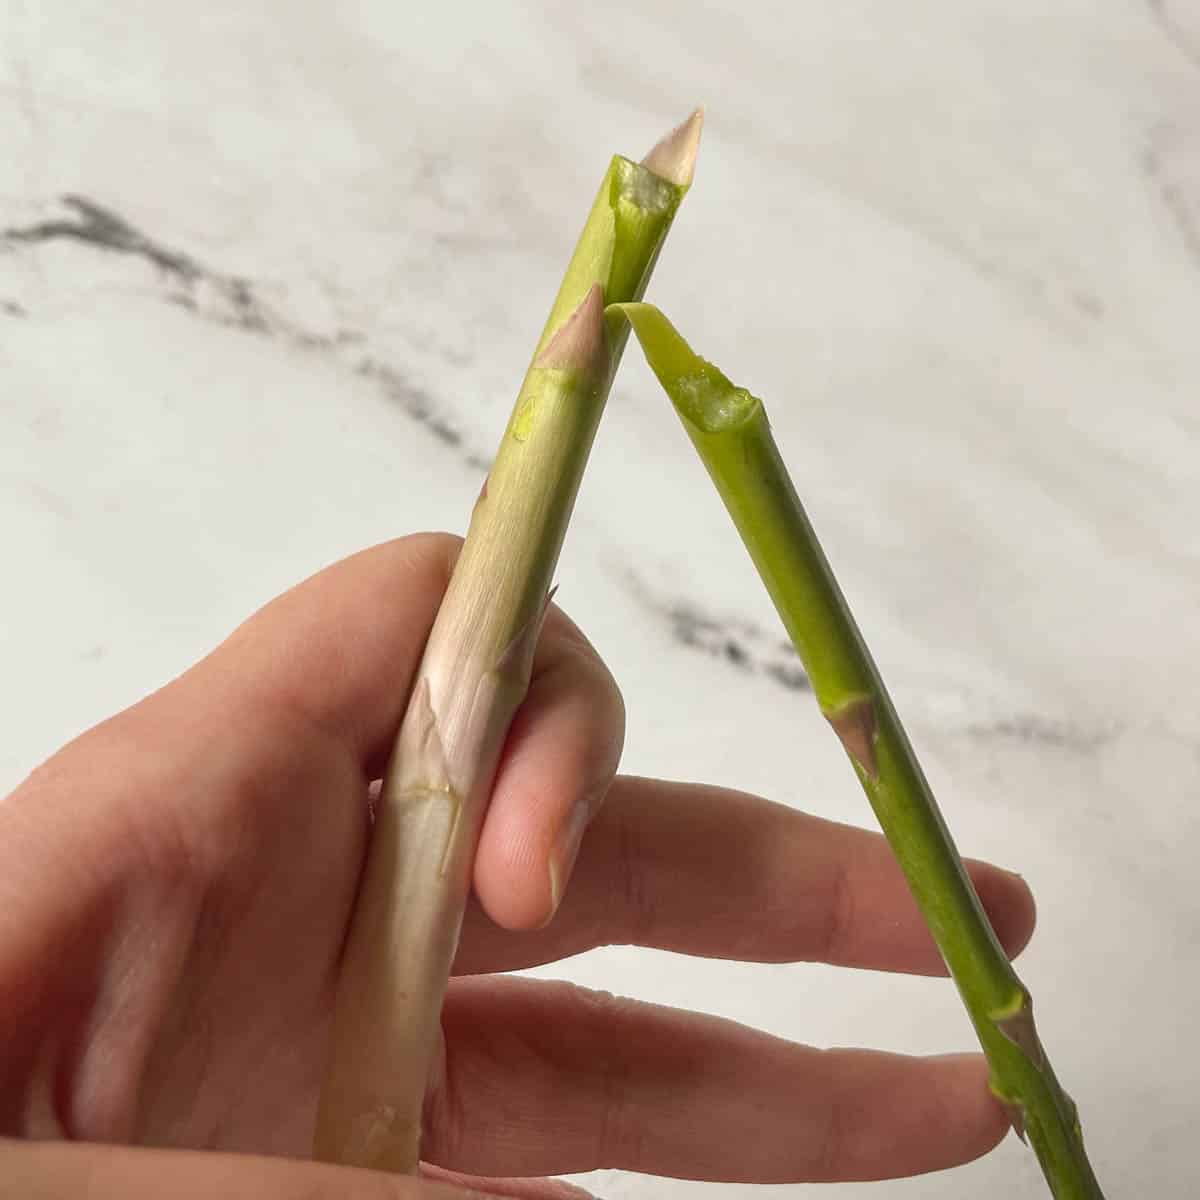 A stalk of asparagus is snapped just above the hard part of the stalk.